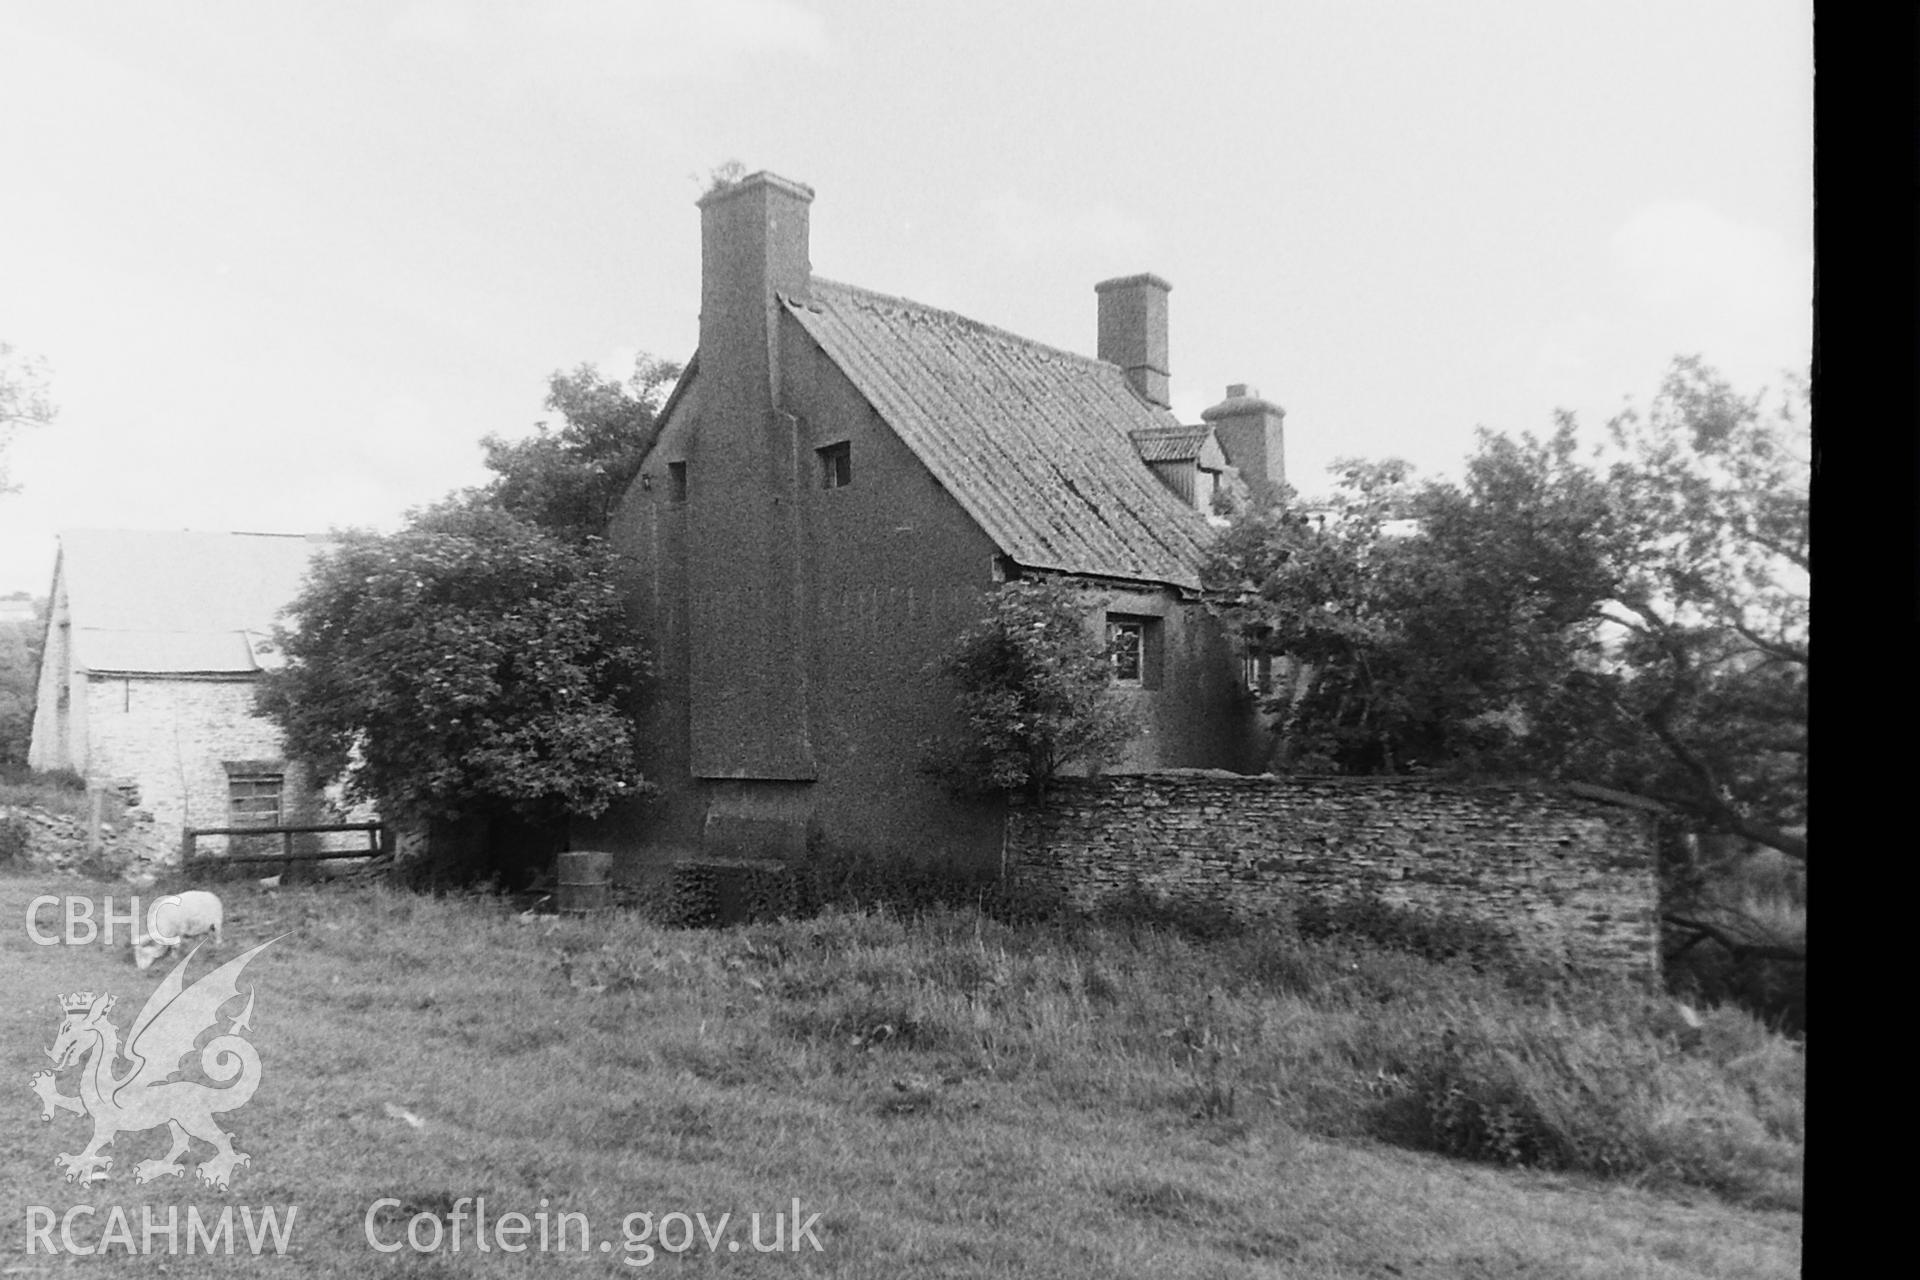 Black and white photo showing exterior view of Gelli Dywyll, Argoed  taken by Paul R. Davis prior to restoration.